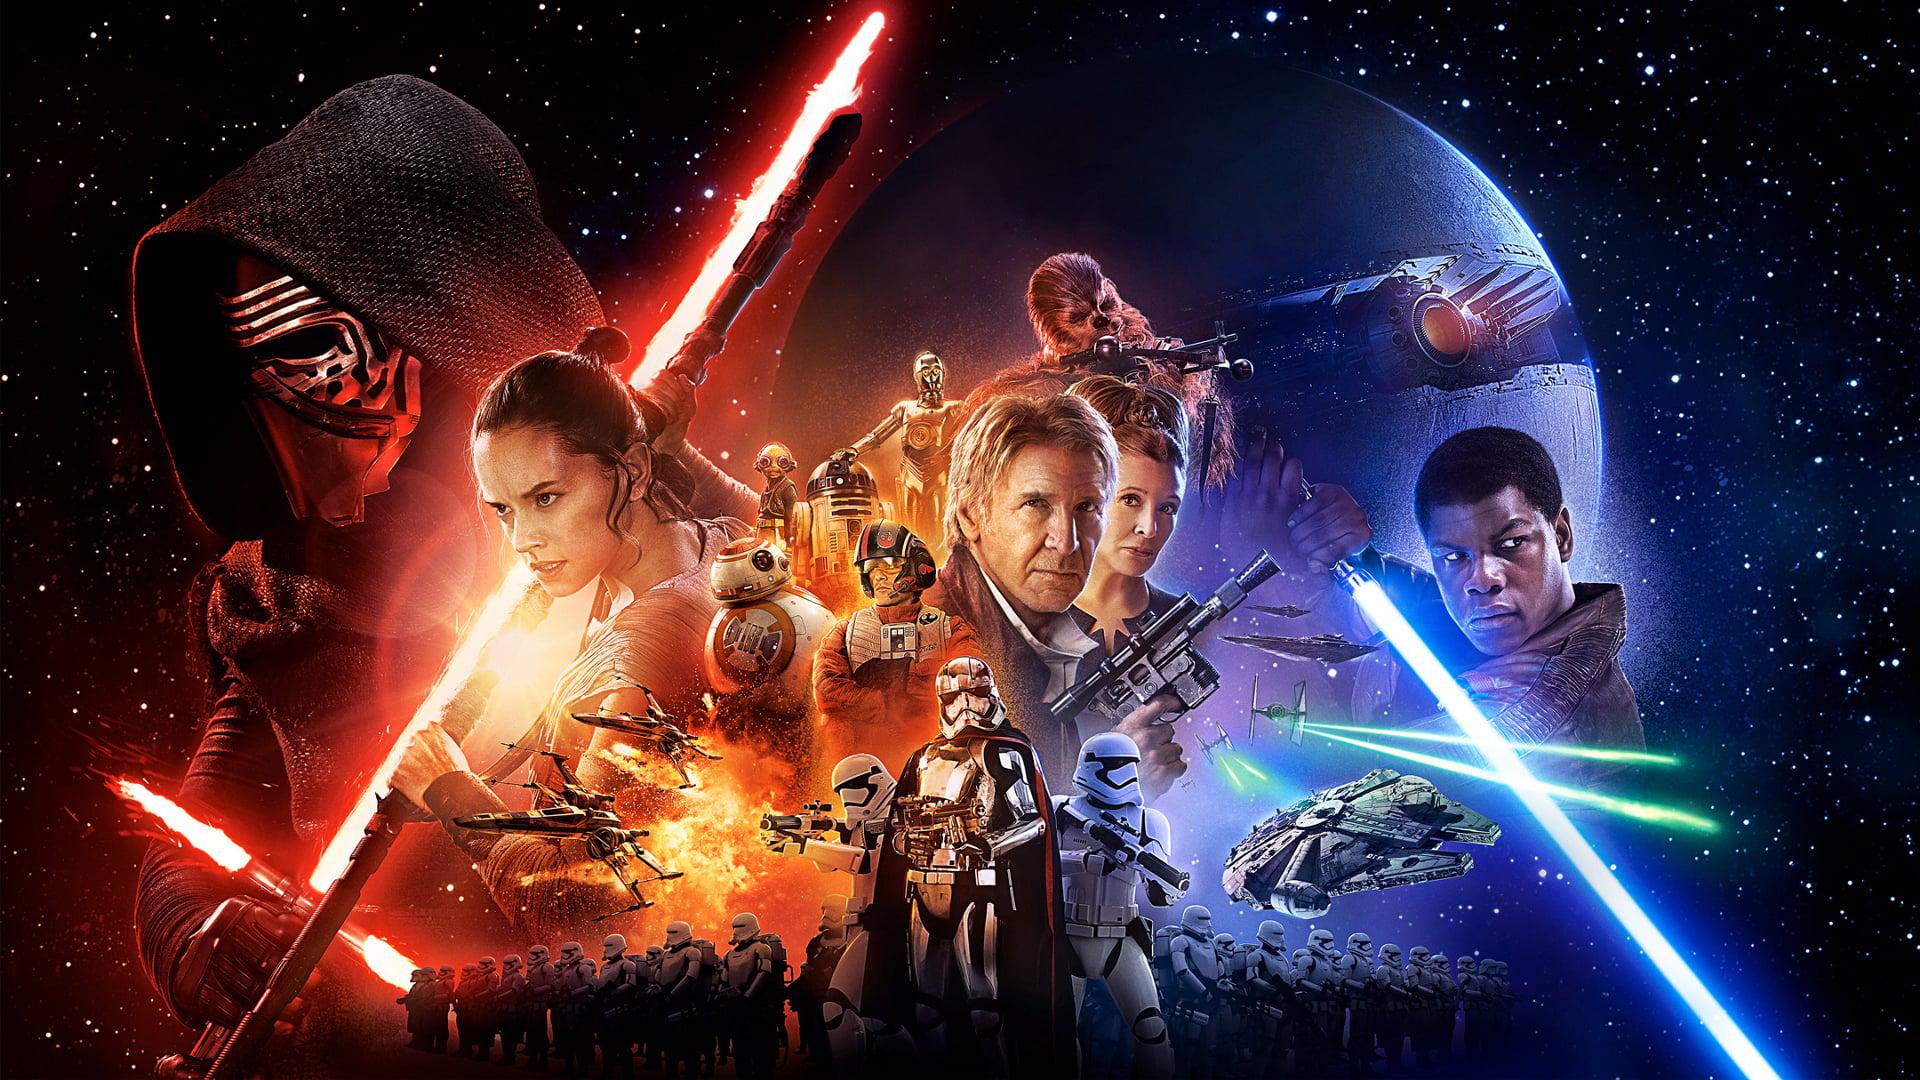 Backdrop Image for Star Wars: The Force Awakens